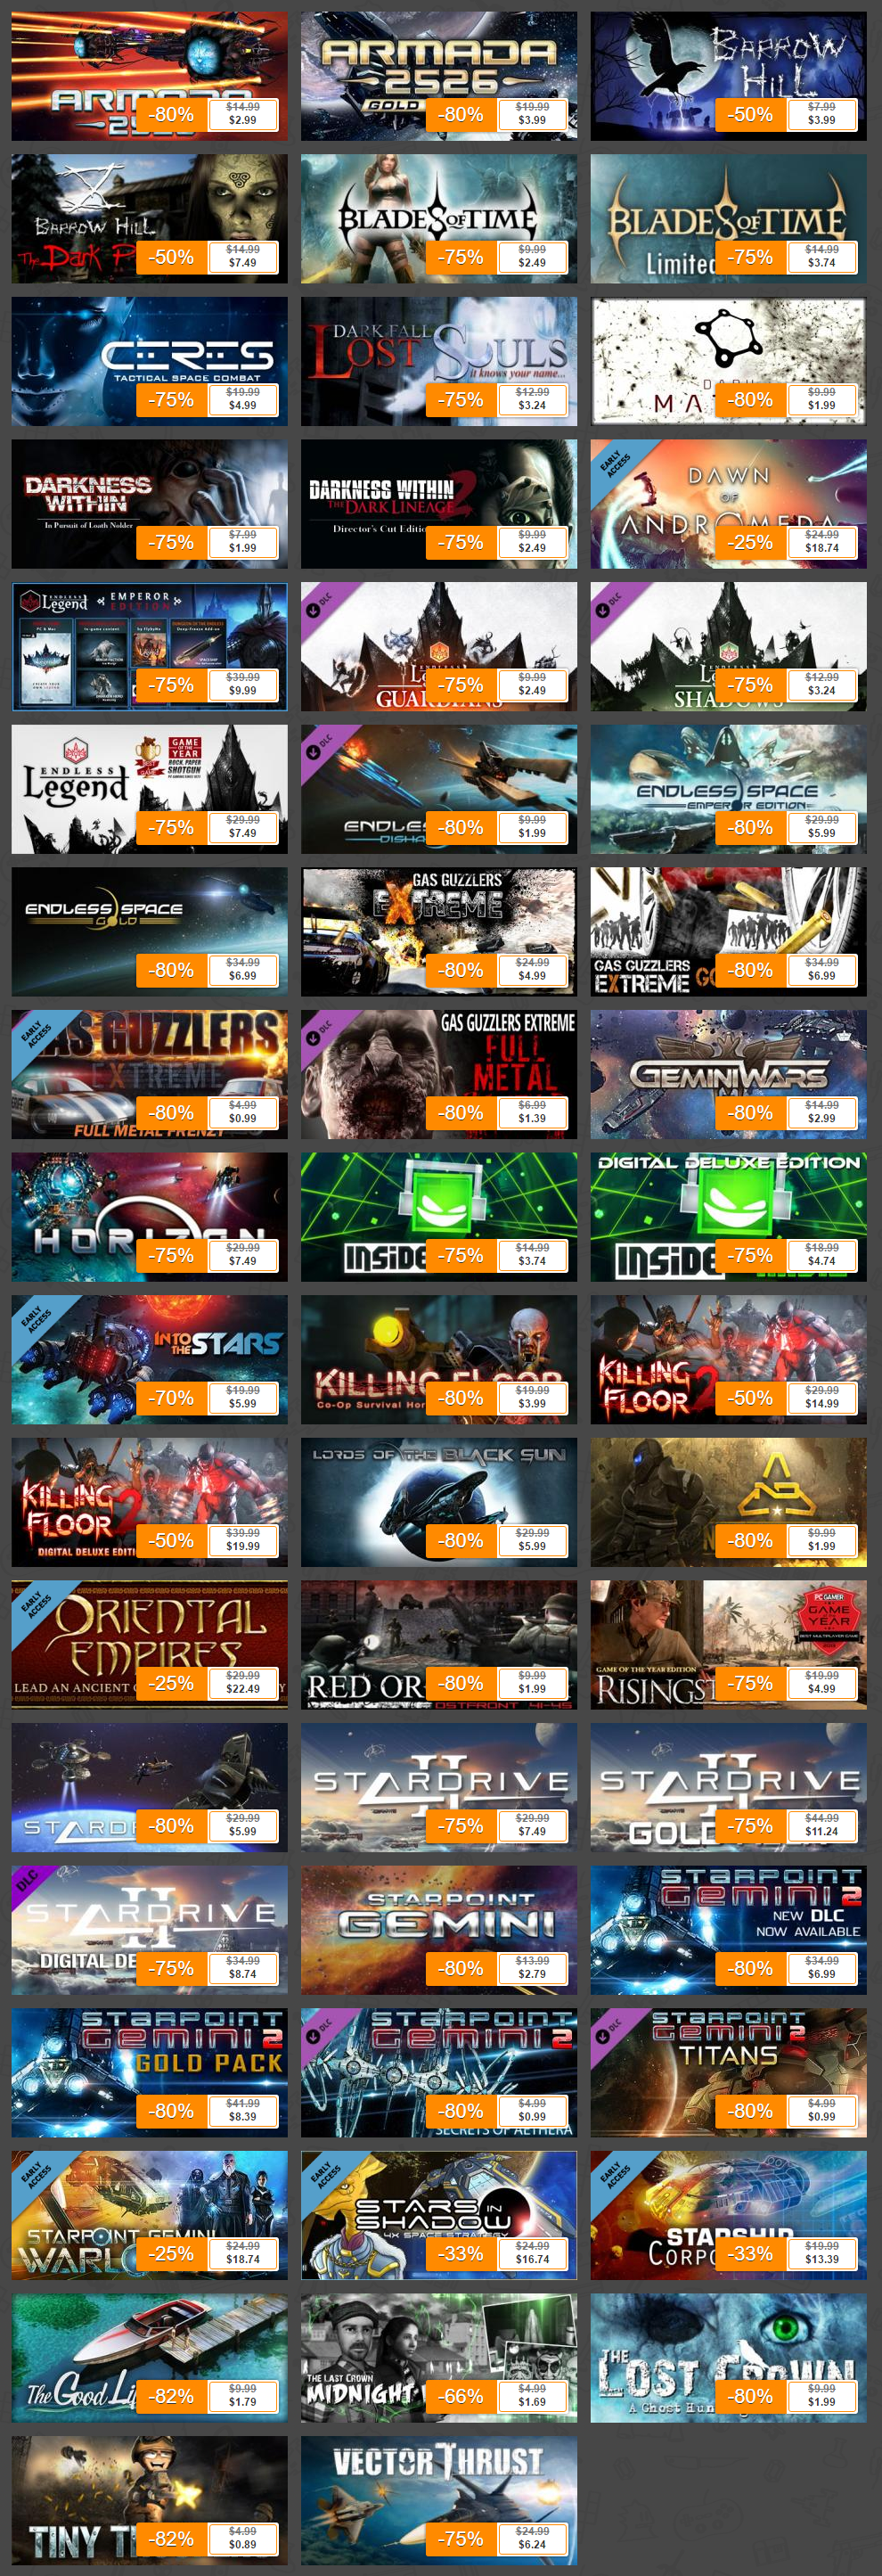 Iceberg Interactive   Indiegala Store.png